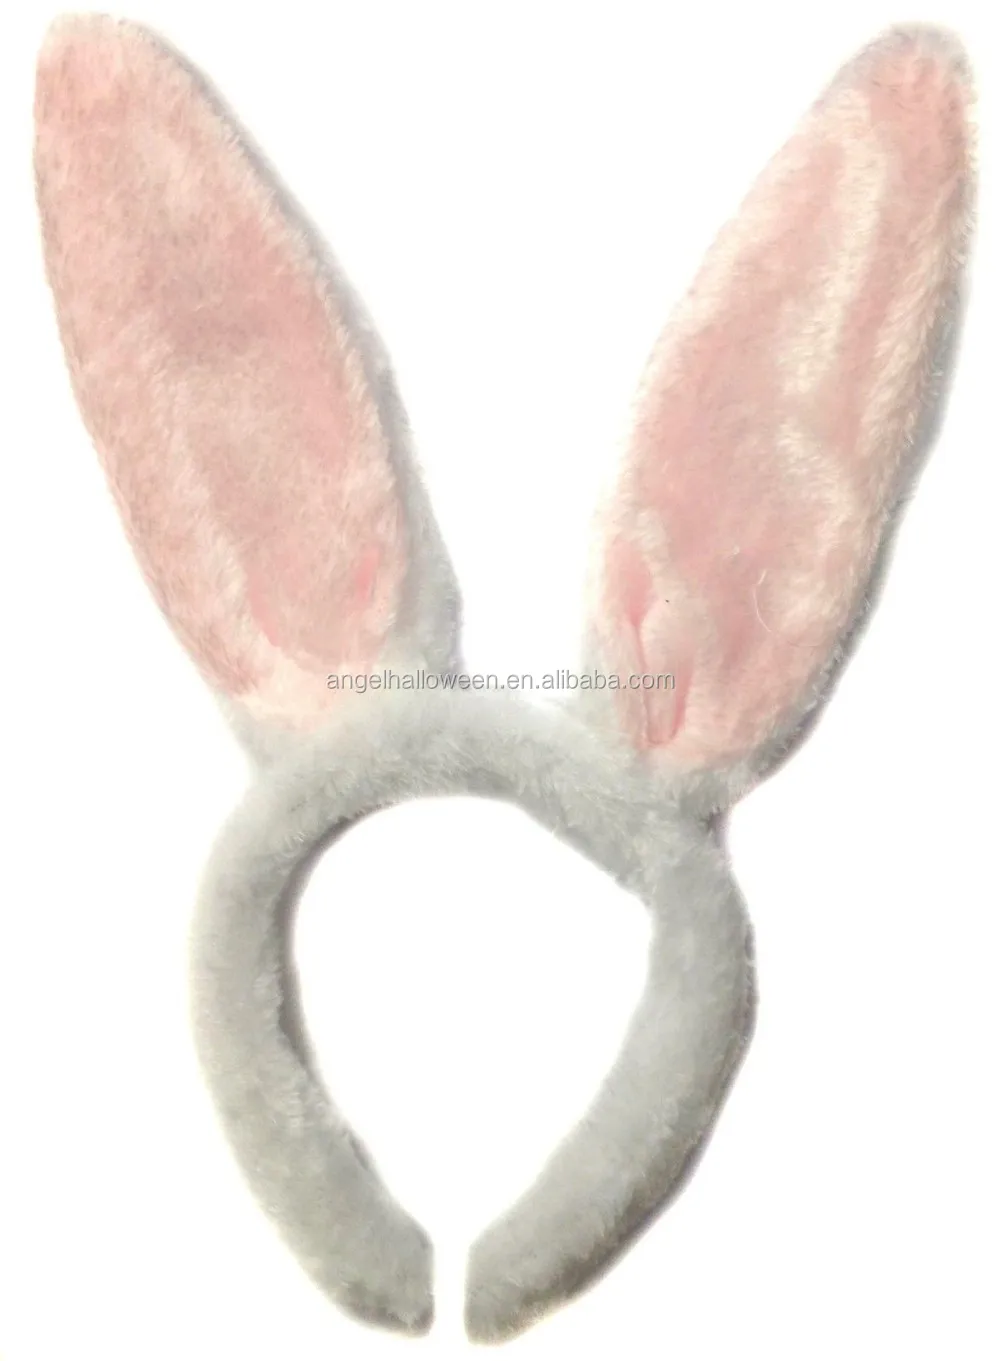 Grey Pink Mouse Ears Aliceband Fancy Dress Hair Accessories World Book Day 